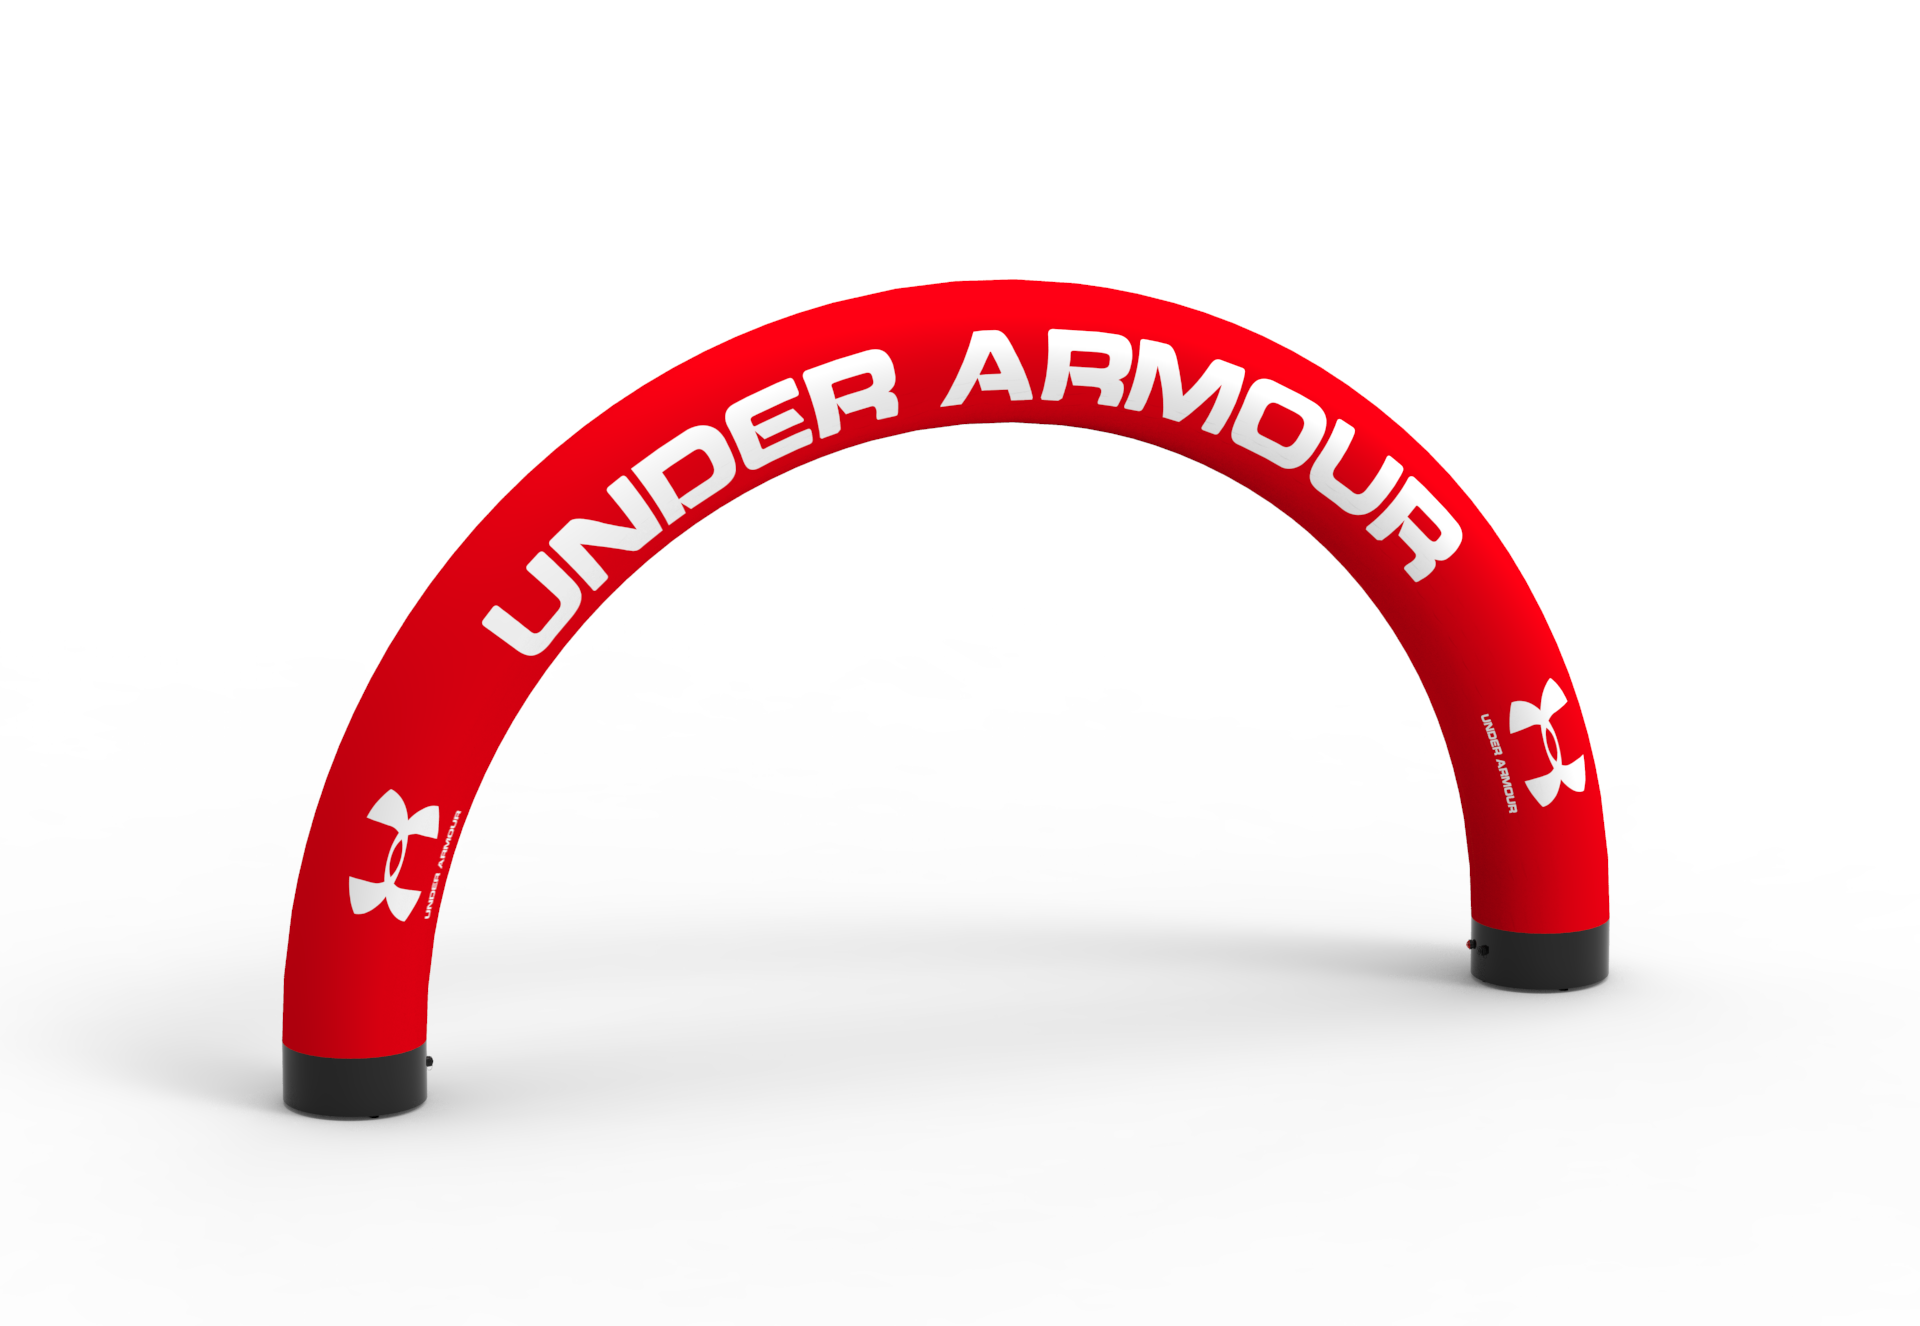 Inflatable Arch | Custom Made Round Arch | Printed Marathon Arches